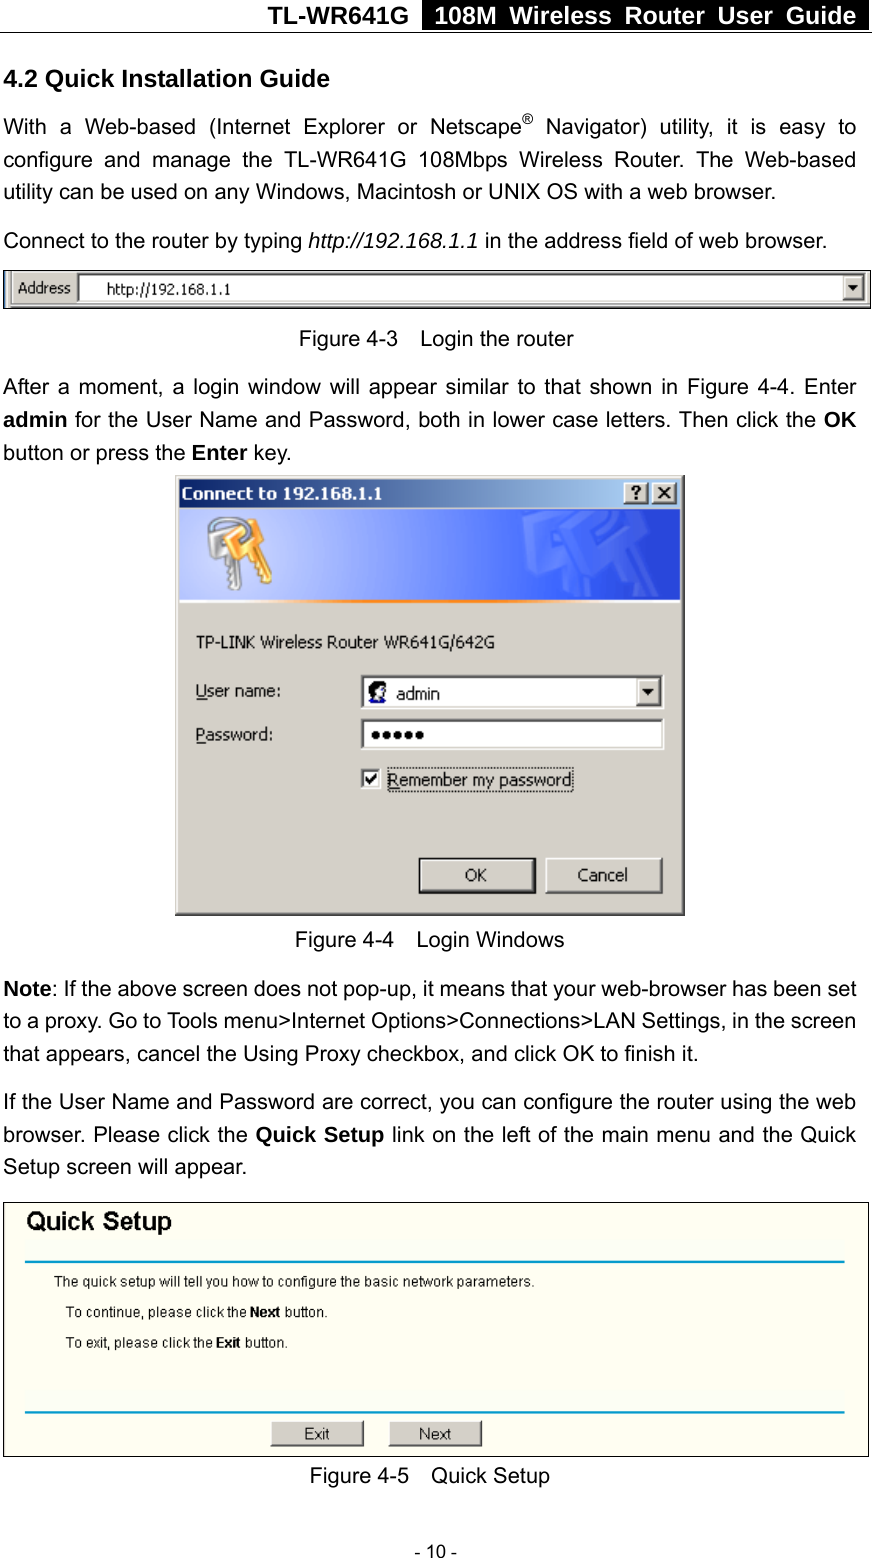 TL-WR641G   108M Wireless Router User Guide  4.2 Quick Installation Guide With a Web-based (Internet Explorer or Netscape® Navigator) utility, it is easy to configure and manage the TL-WR641G 108Mbps Wireless Router. The Web-based utility can be used on any Windows, Macintosh or UNIX OS with a web browser. Connect to the router by typing http://192.168.1.1 in the address field of web browser.  Figure 4-3    Login the router After a moment, a login window will appear similar to that shown in Figure 4-4. Enter admin for the User Name and Password, both in lower case letters. Then click the OK button or press the Enter key.  Figure 4-4  Login Windows Note: If the above screen does not pop-up, it means that your web-browser has been set to a proxy. Go to Tools menu&gt;Internet Options&gt;Connections&gt;LAN Settings, in the screen that appears, cancel the Using Proxy checkbox, and click OK to finish it. If the User Name and Password are correct, you can configure the router using the web browser. Please click the Quick Setup link on the left of the main menu and the Quick Setup screen will appear.  Figure 4-5  Quick Setup  - 10 - 